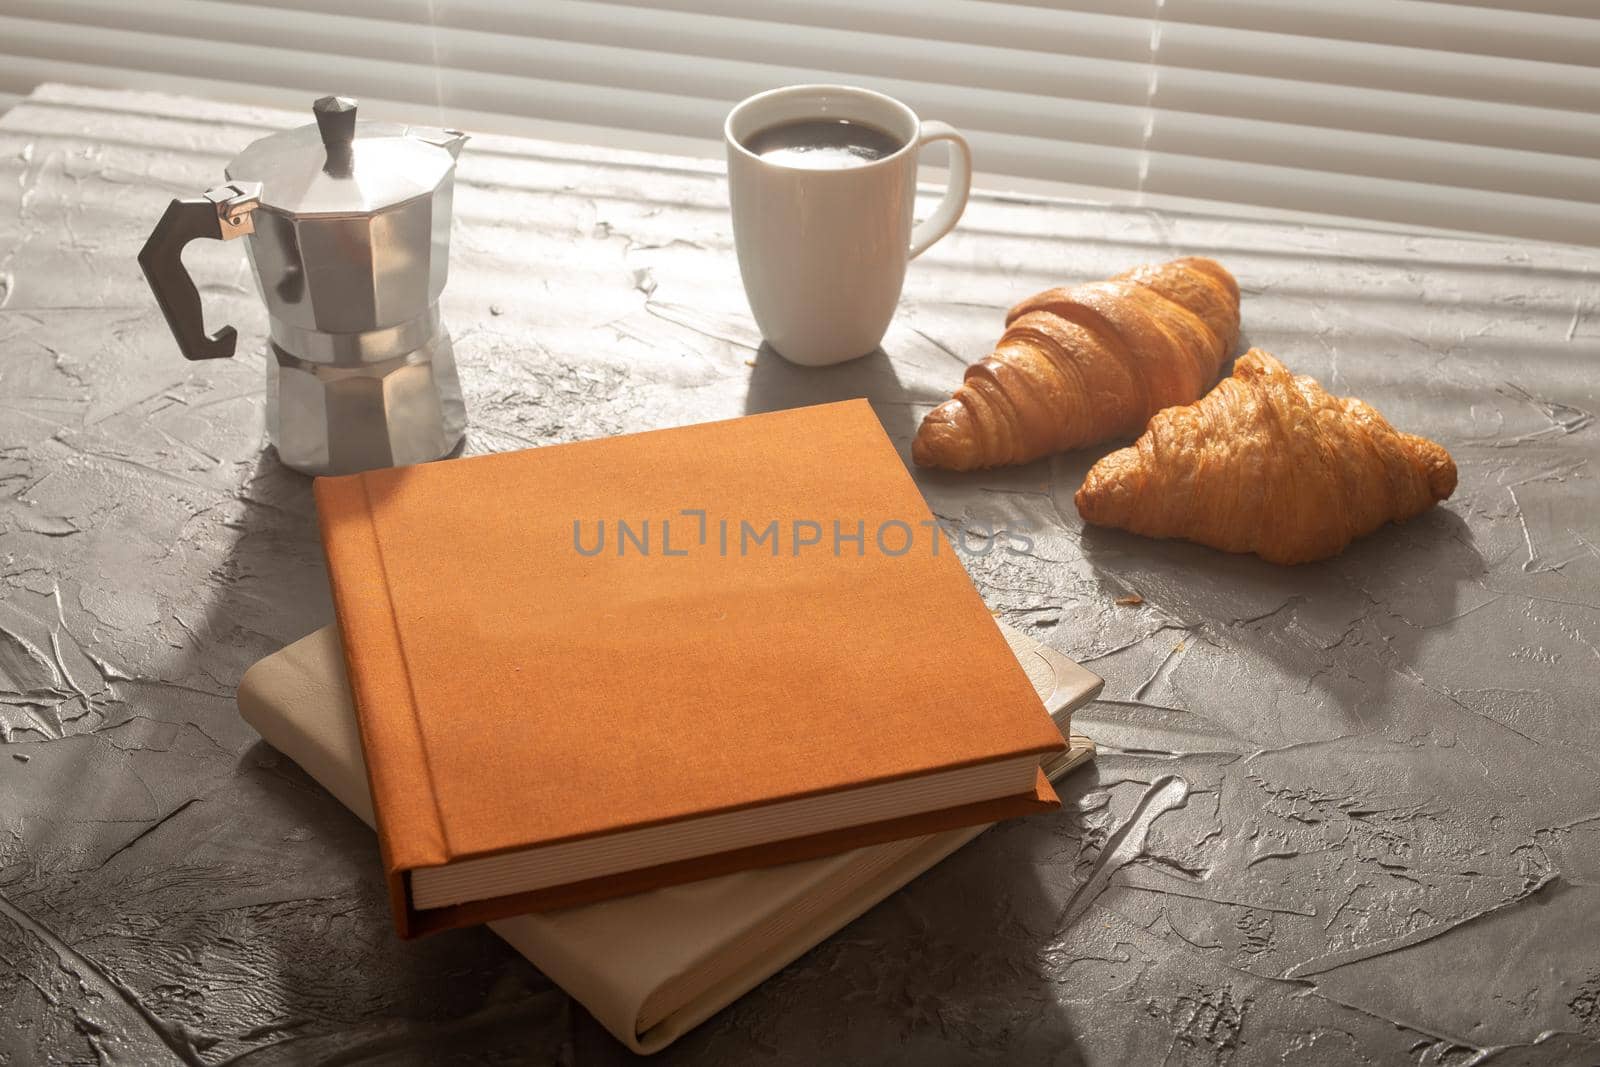 Still life for pleasant morning coffee turk cup and croissants with two books on the table. Lunch break concept or start the morning by Satura86